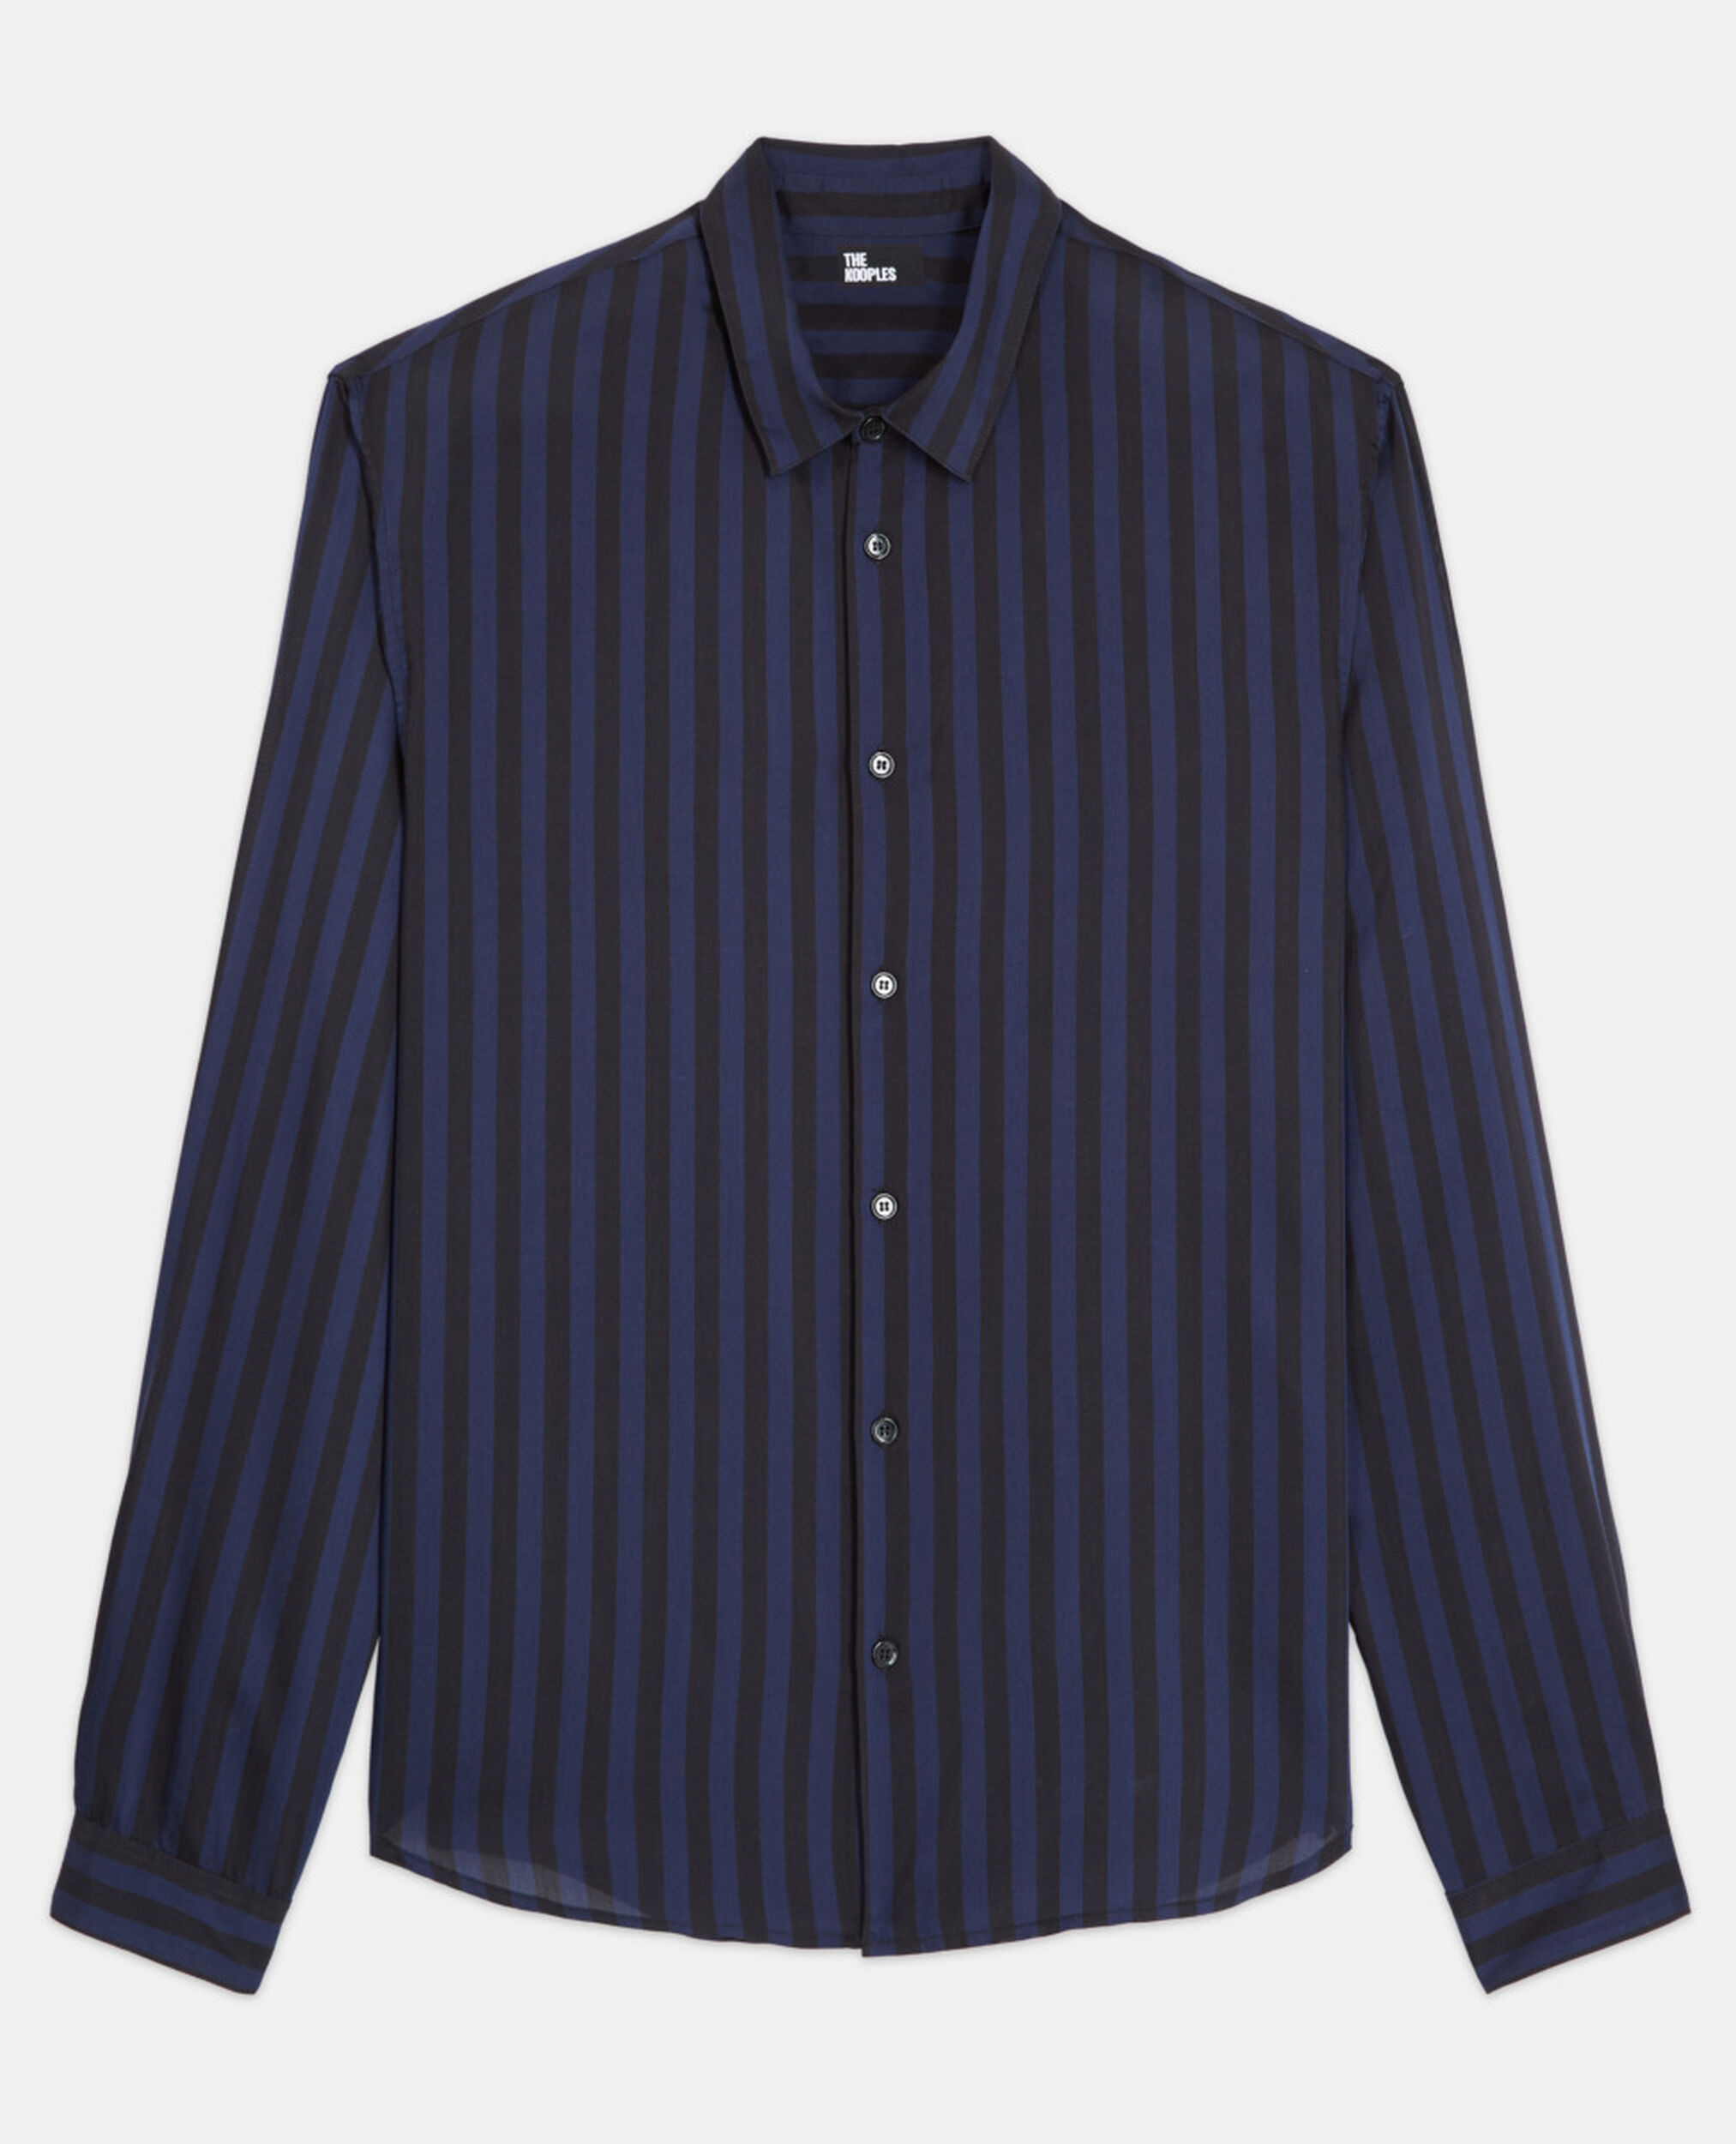 Chemise col classique à rayures, NAVY / BLACK, hi-res image number null